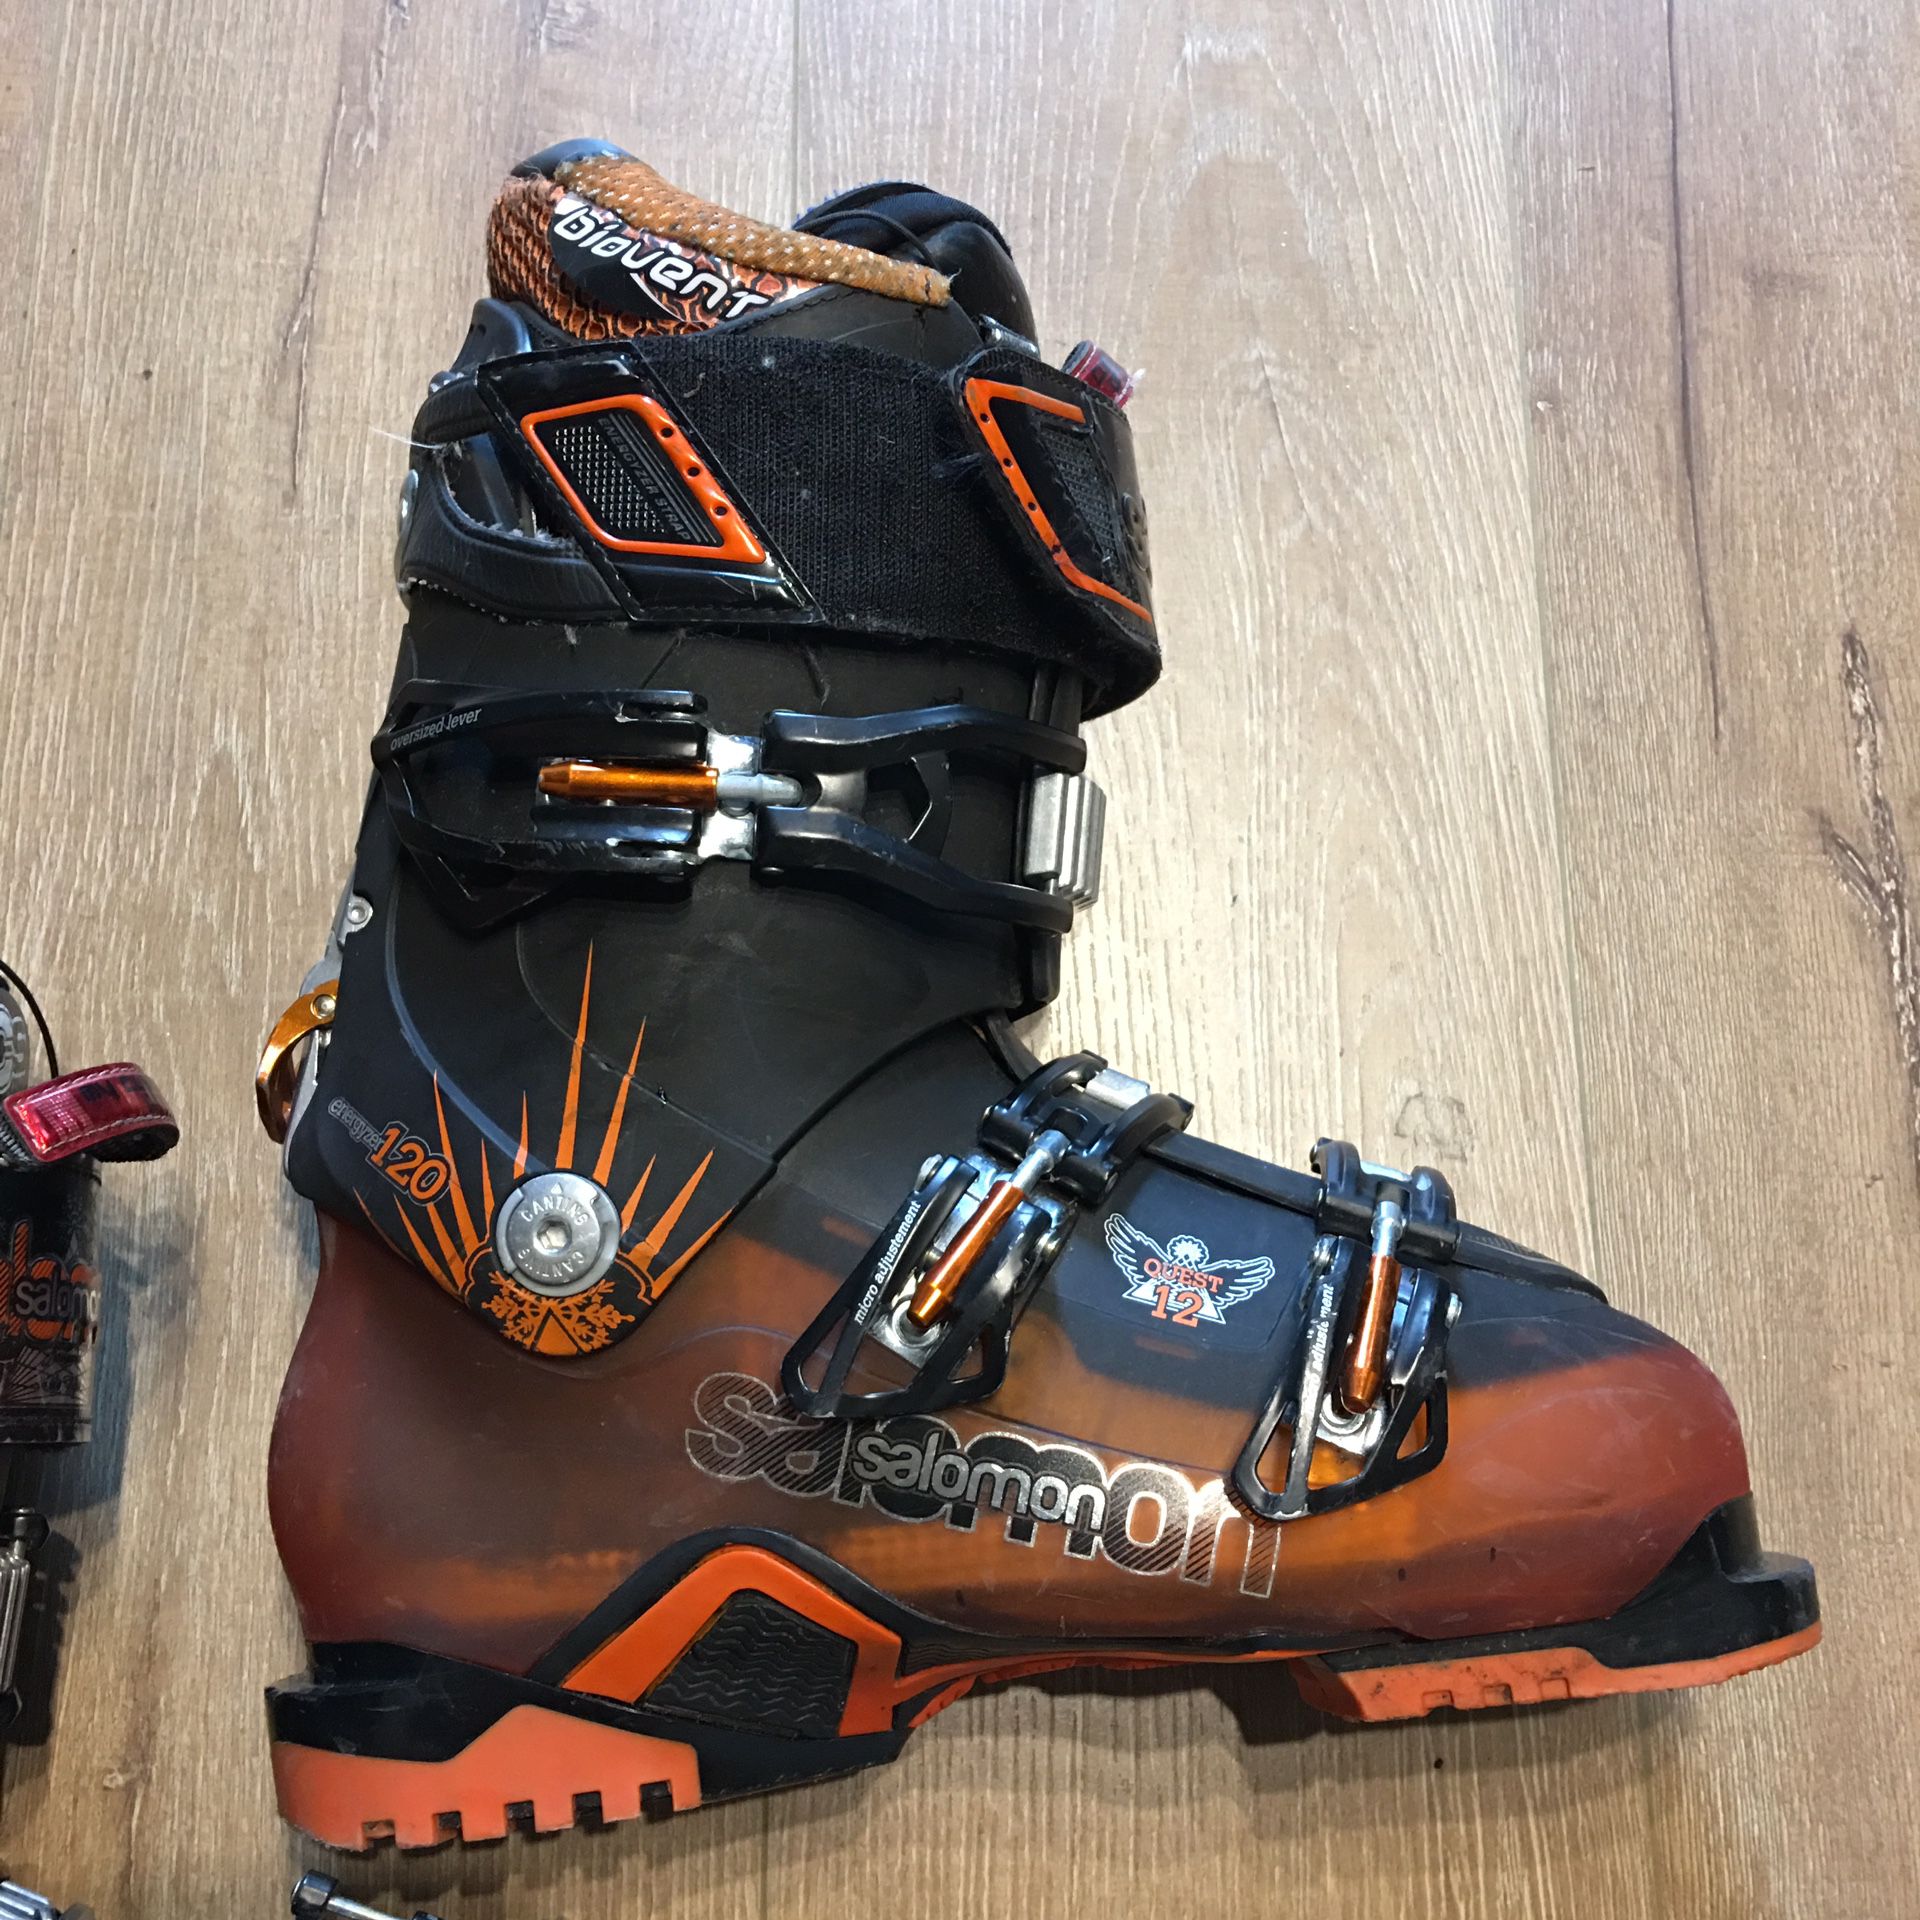 Mens 26-26.5 Quest 12 Touring 120 Ski Boots Sale in Seattle, WA - OfferUp